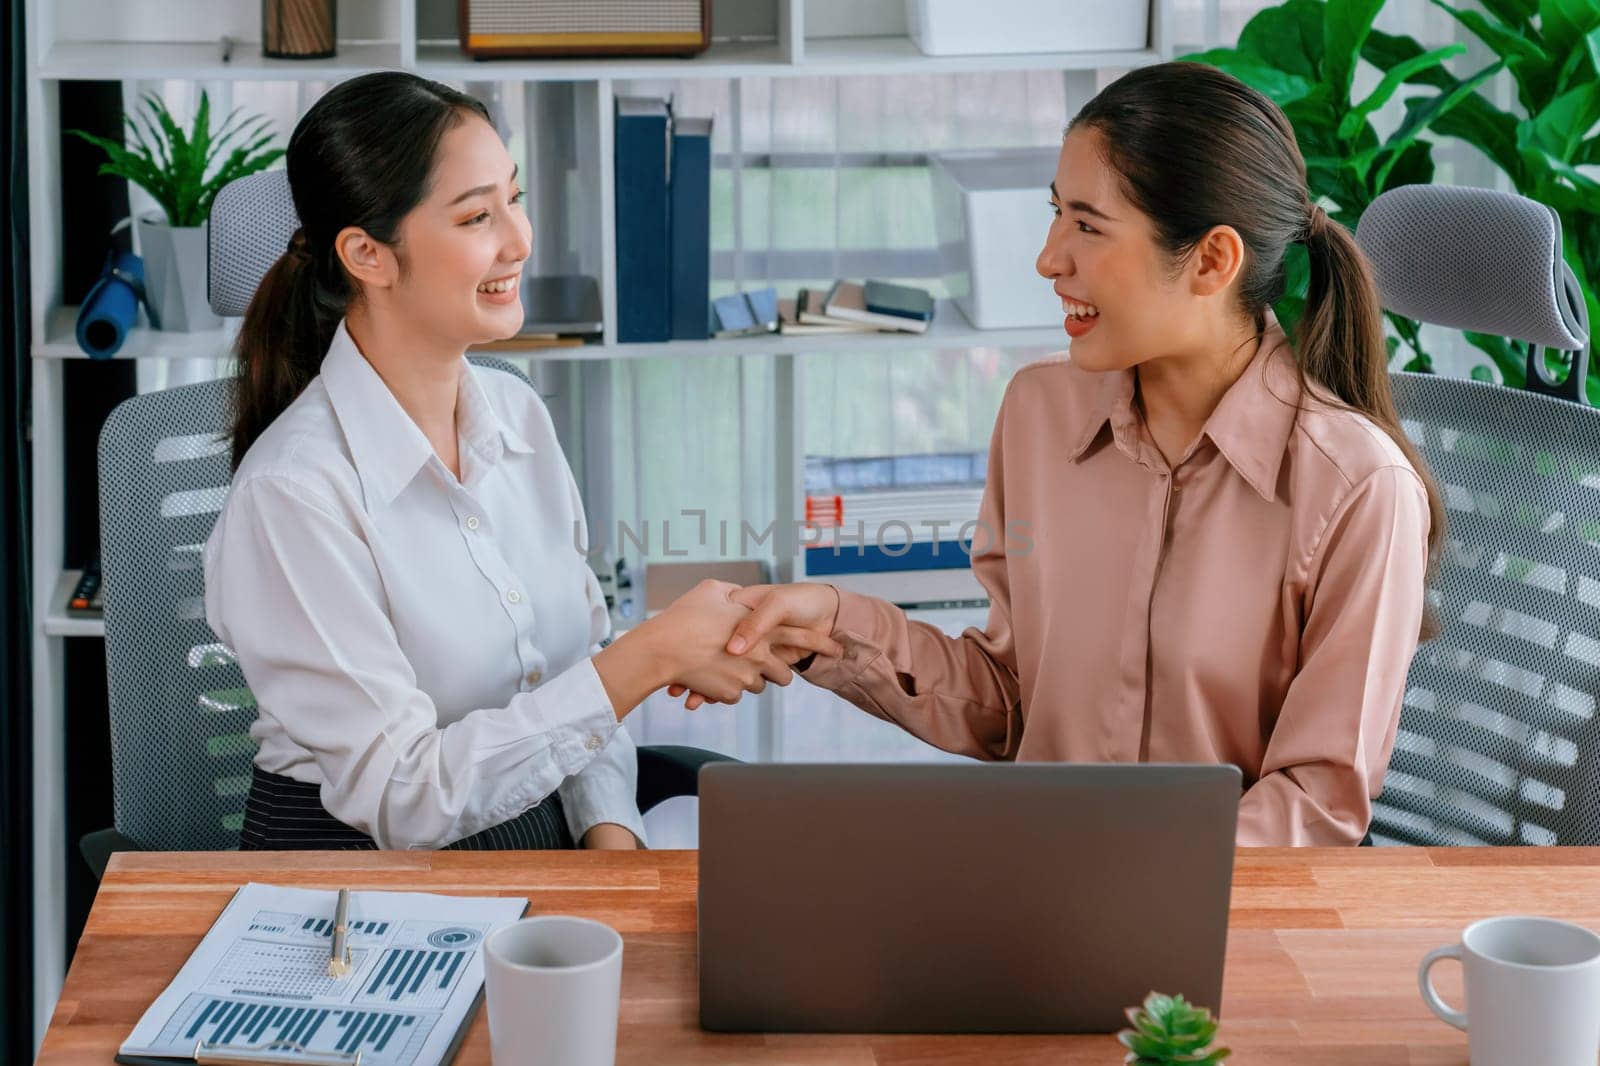 Two Asian businesswomen shaking hands in modern office after successfully working or analyzing using laptop as importance of teamwork and integrity in the workplace concept. Enthusiastic